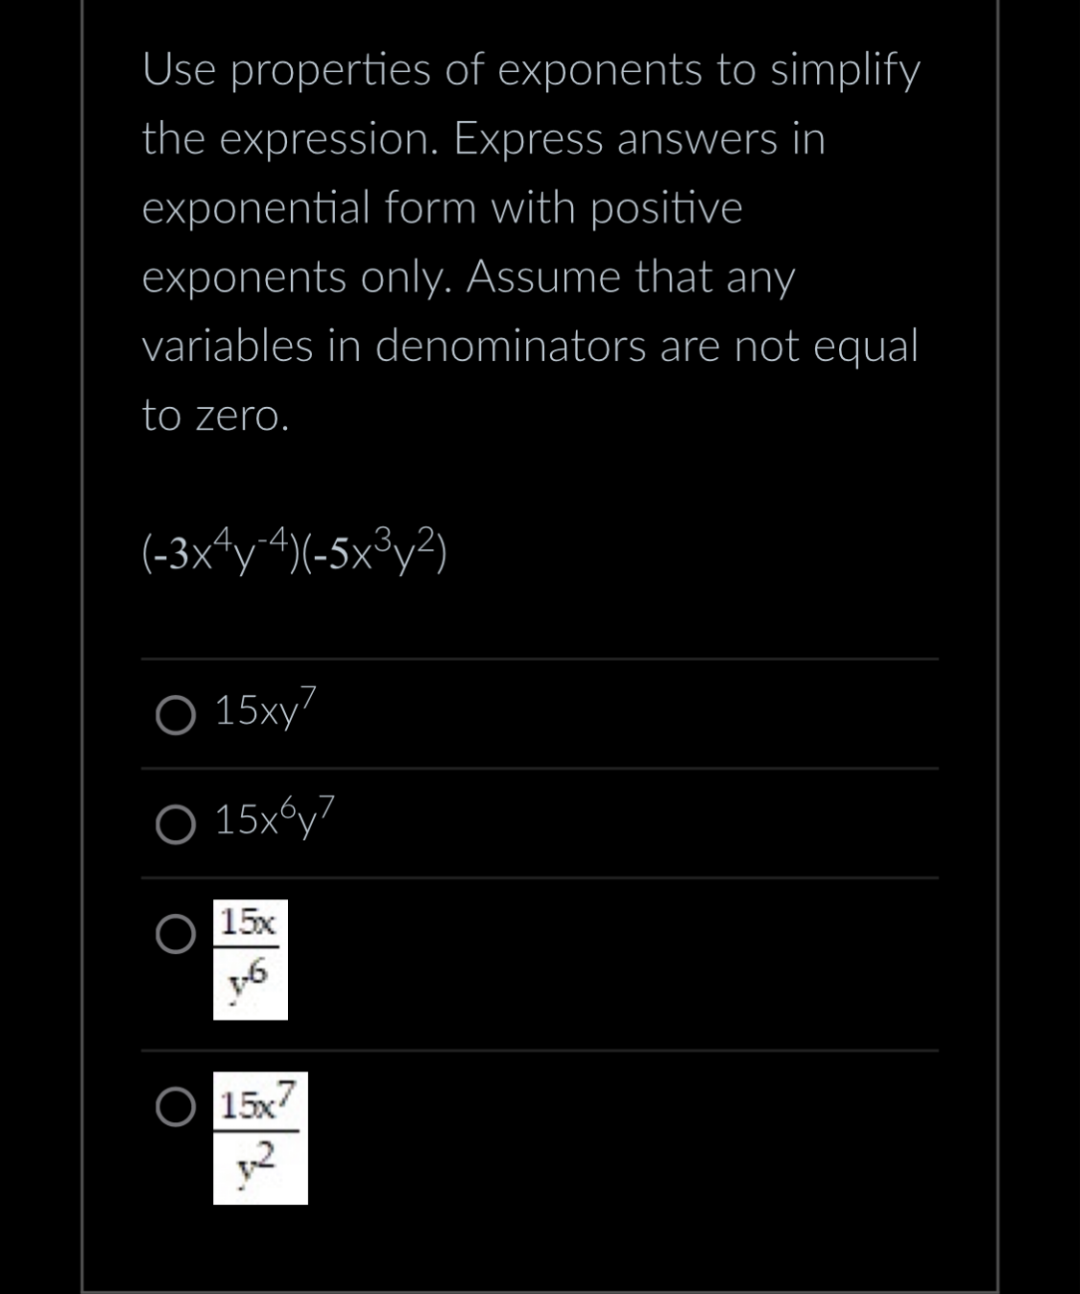 Use properties of exponents to simplify
the expression. Express answers in
exponential form with positive
exponents only. Assume that any
variables in denominators are not equal
to zero.
(-3x4y-4)(-5x³y²)
O 15xy7
O 15x6y7
15x
1-6
g
15x7
2